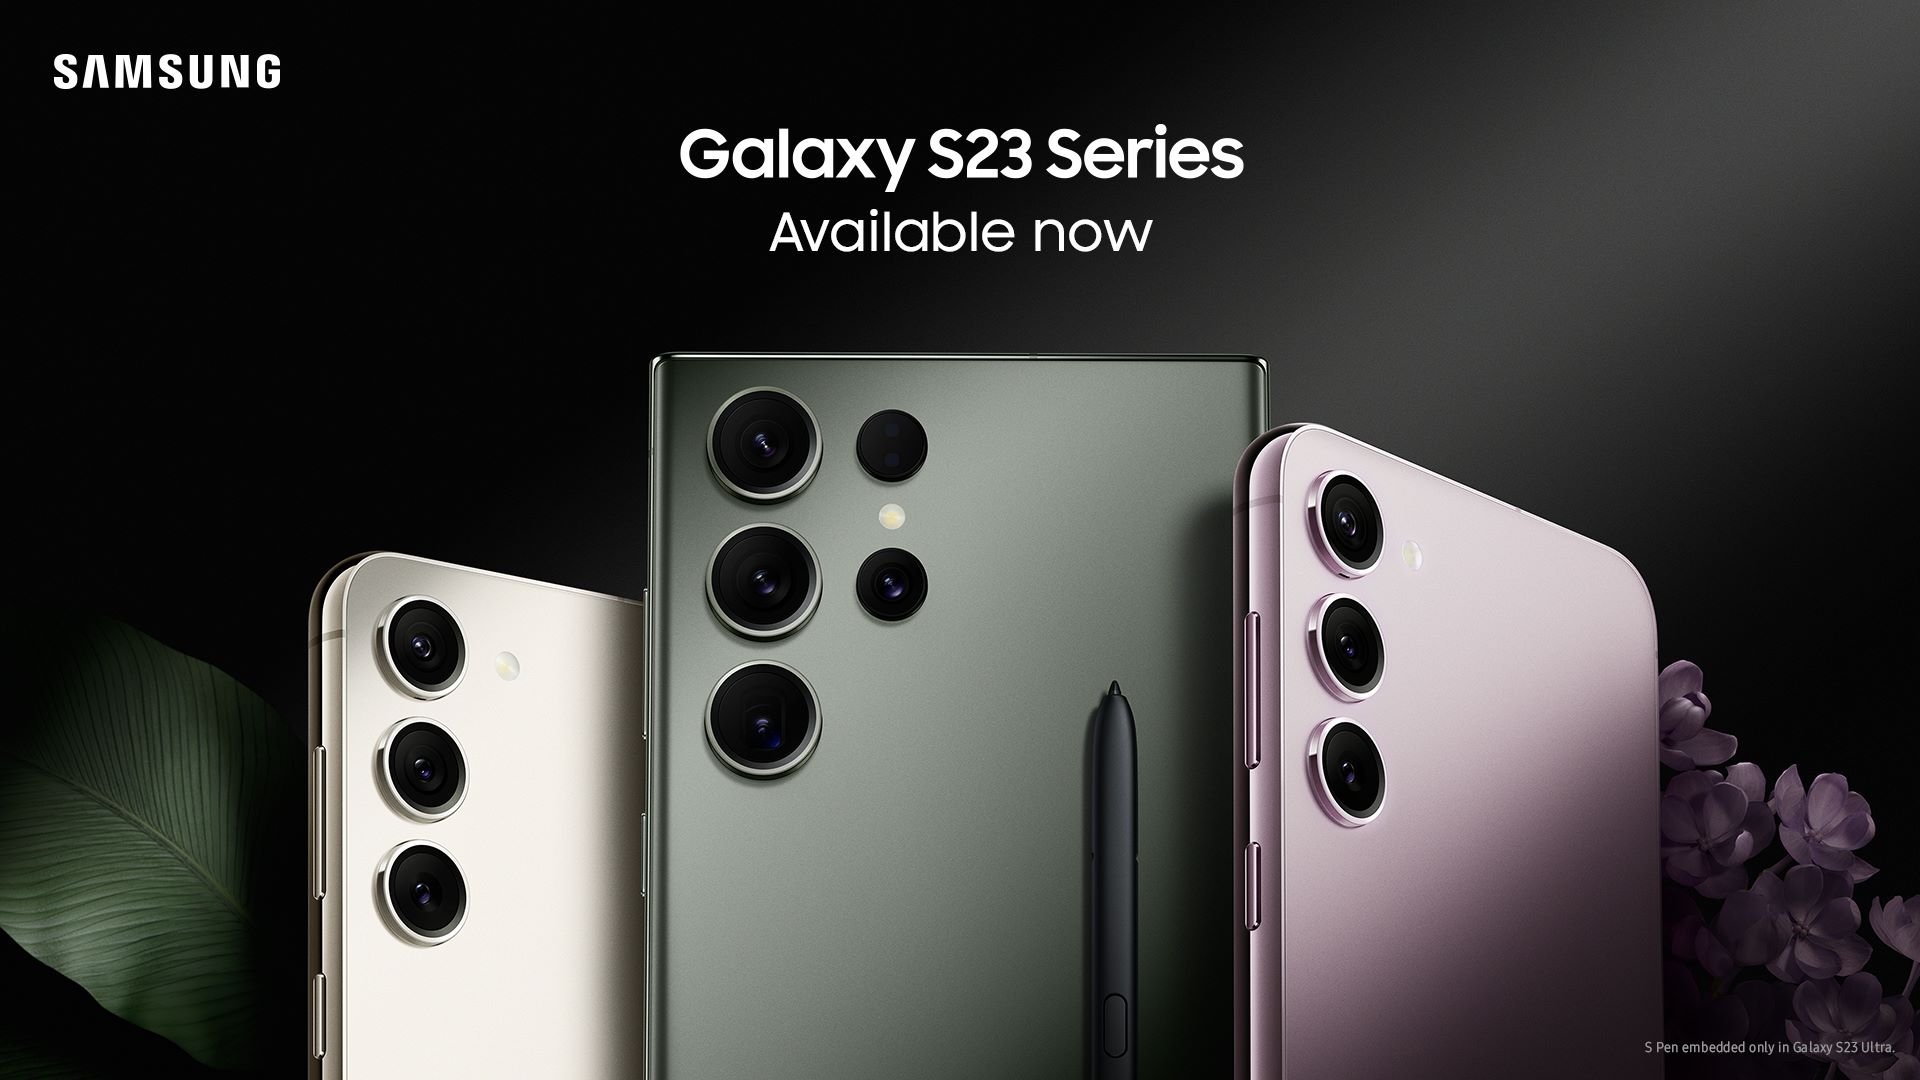 Introducing the Samsung Galaxy S23 series